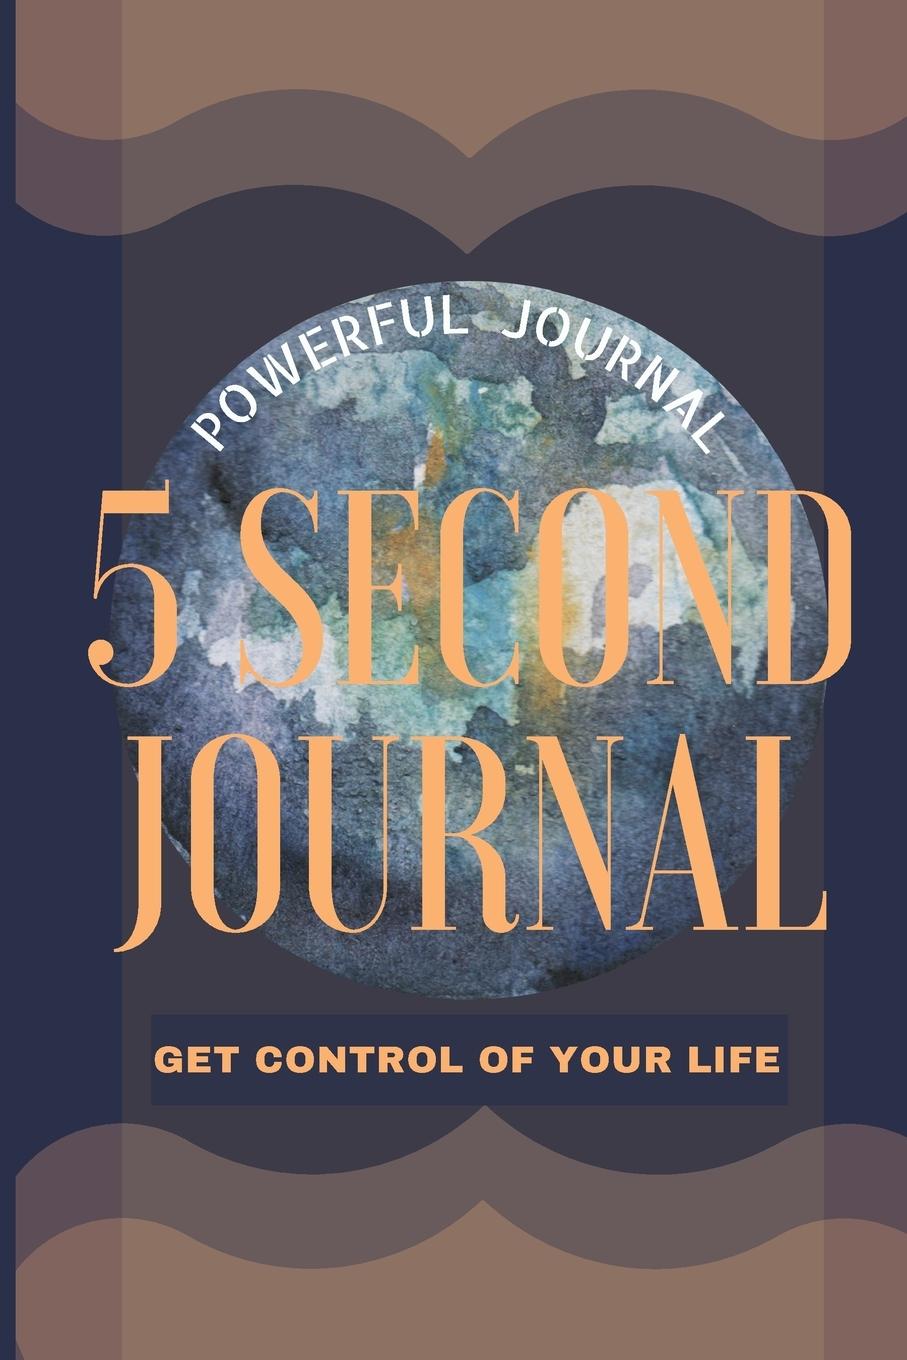 Book 5 Second Journal Get Control of your life Powerful Journal 